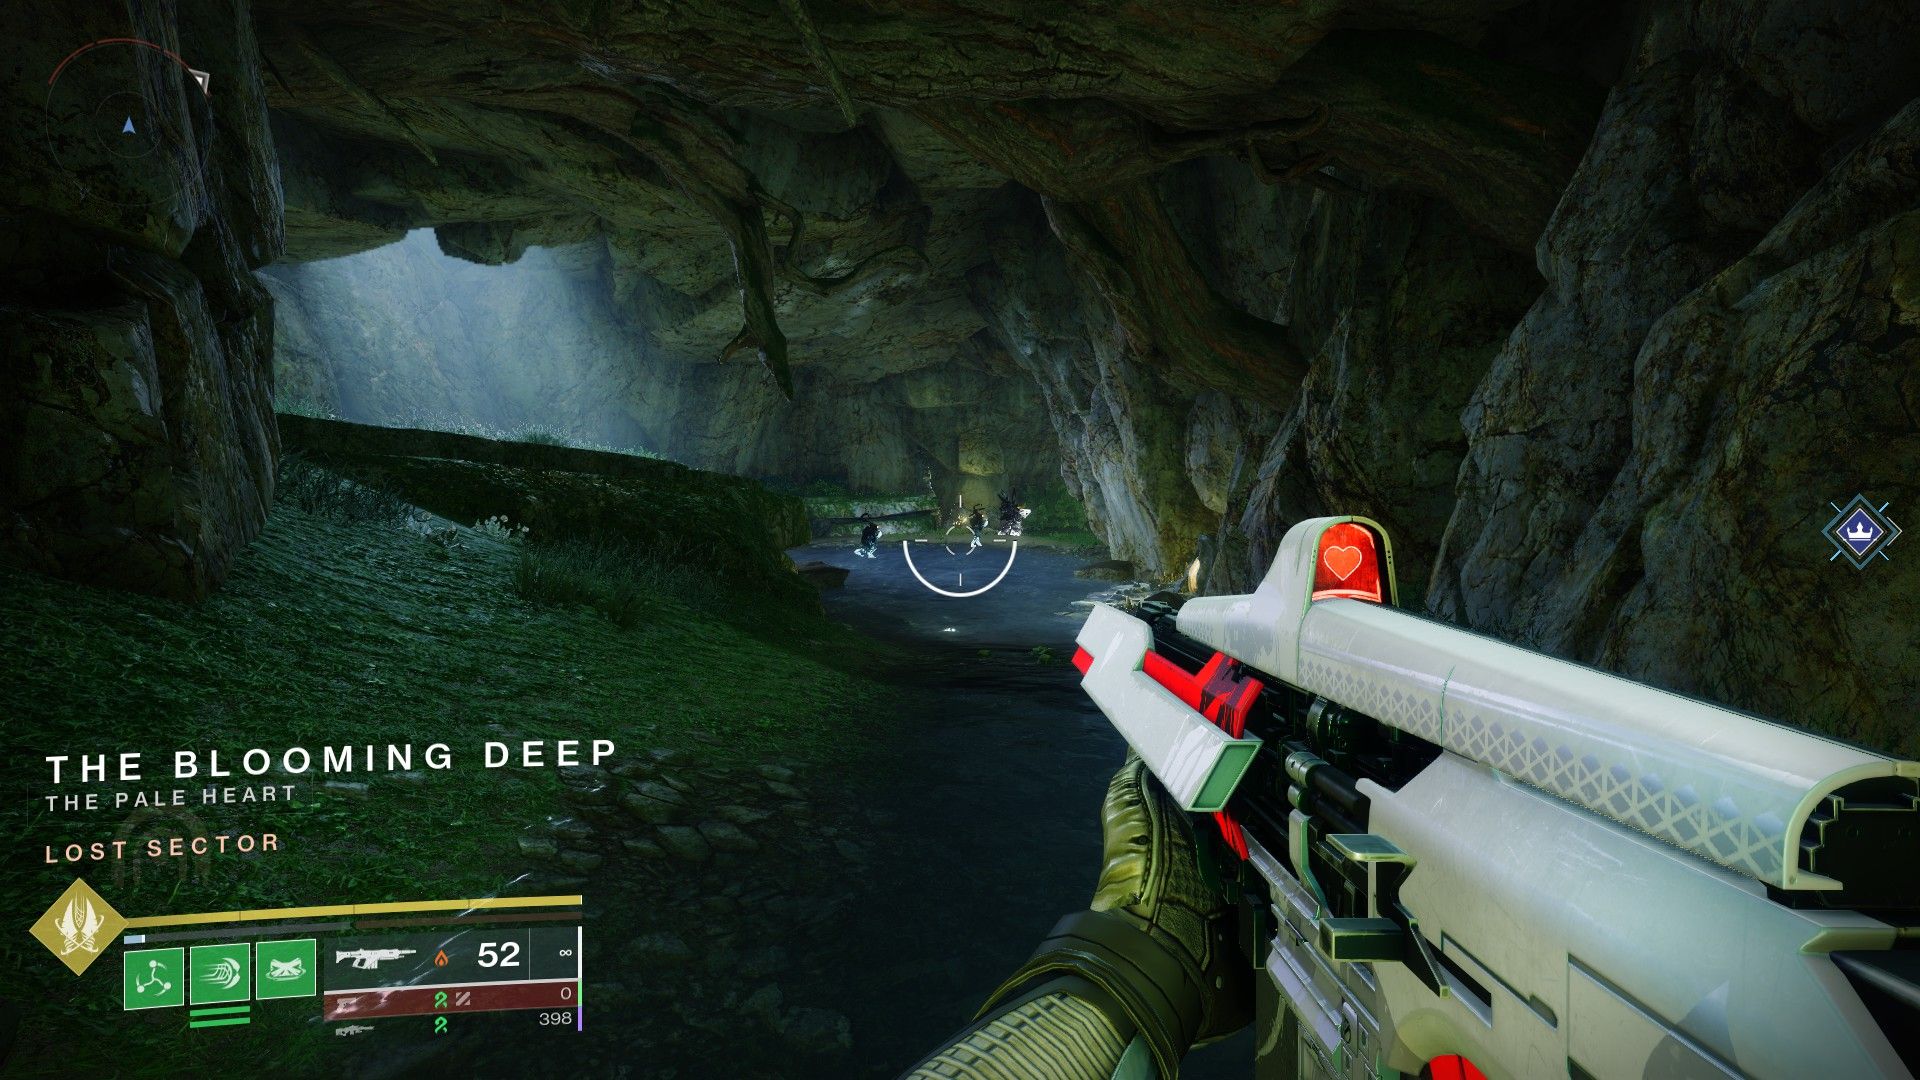 The Blooming Deep lost sector in Destiny 2